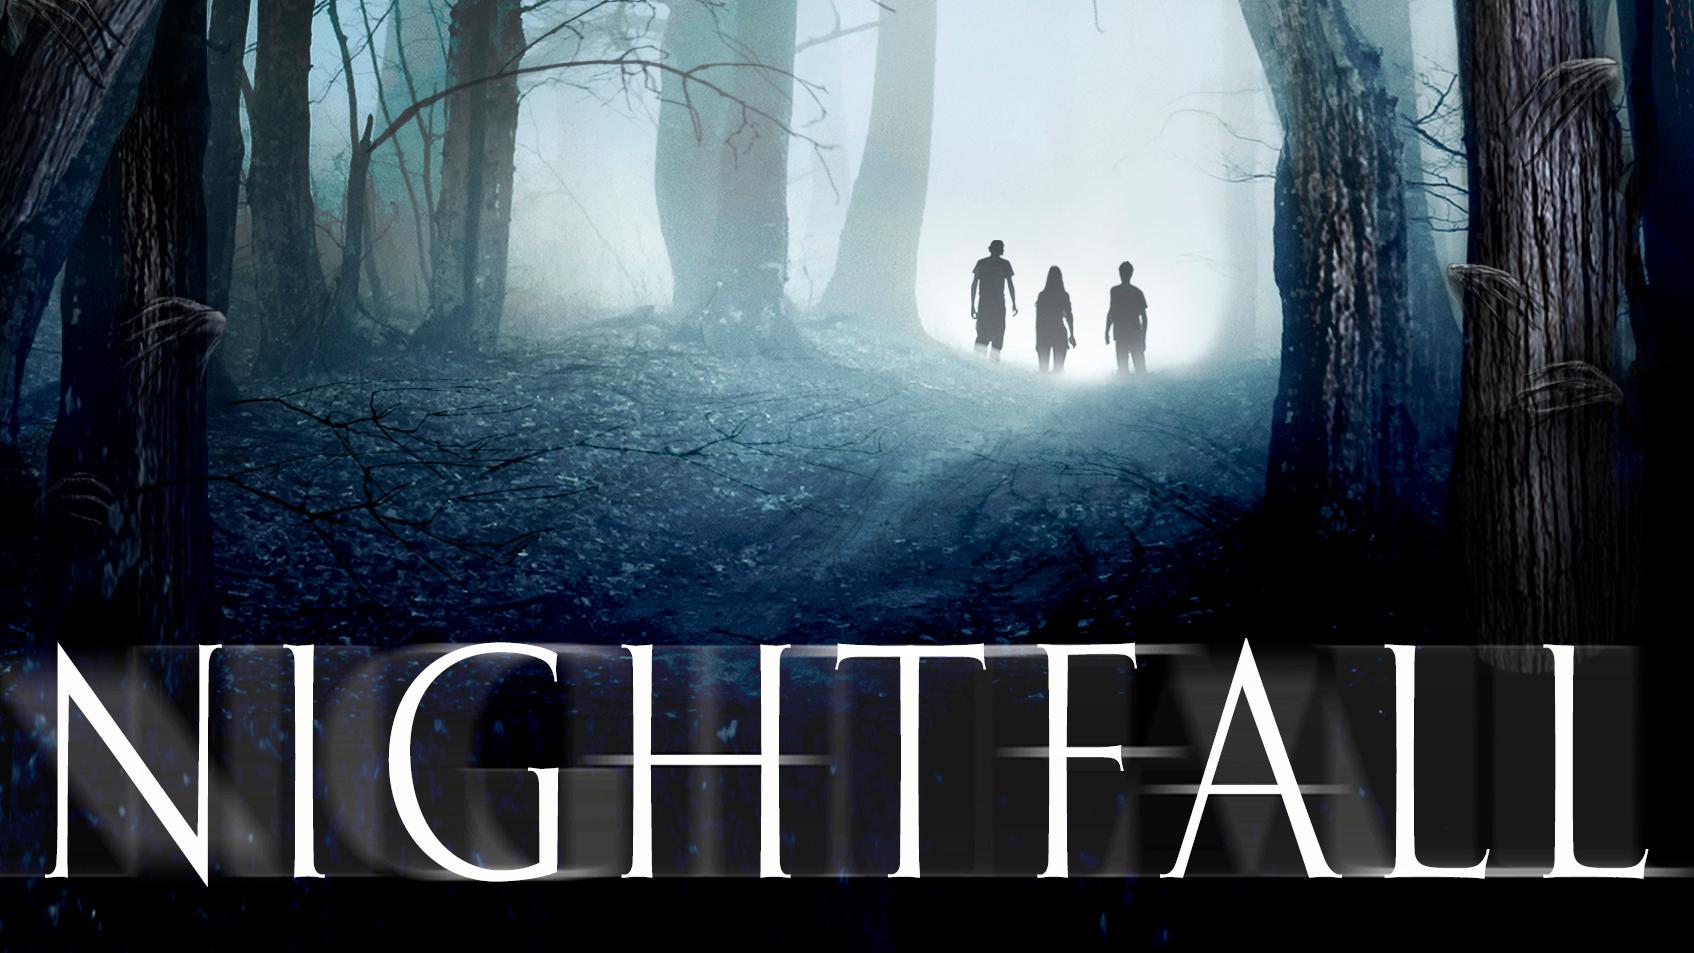 Nightfall tells the story of an island that cycles between 14 years of sunlight and 14 years of terrifying darkness.